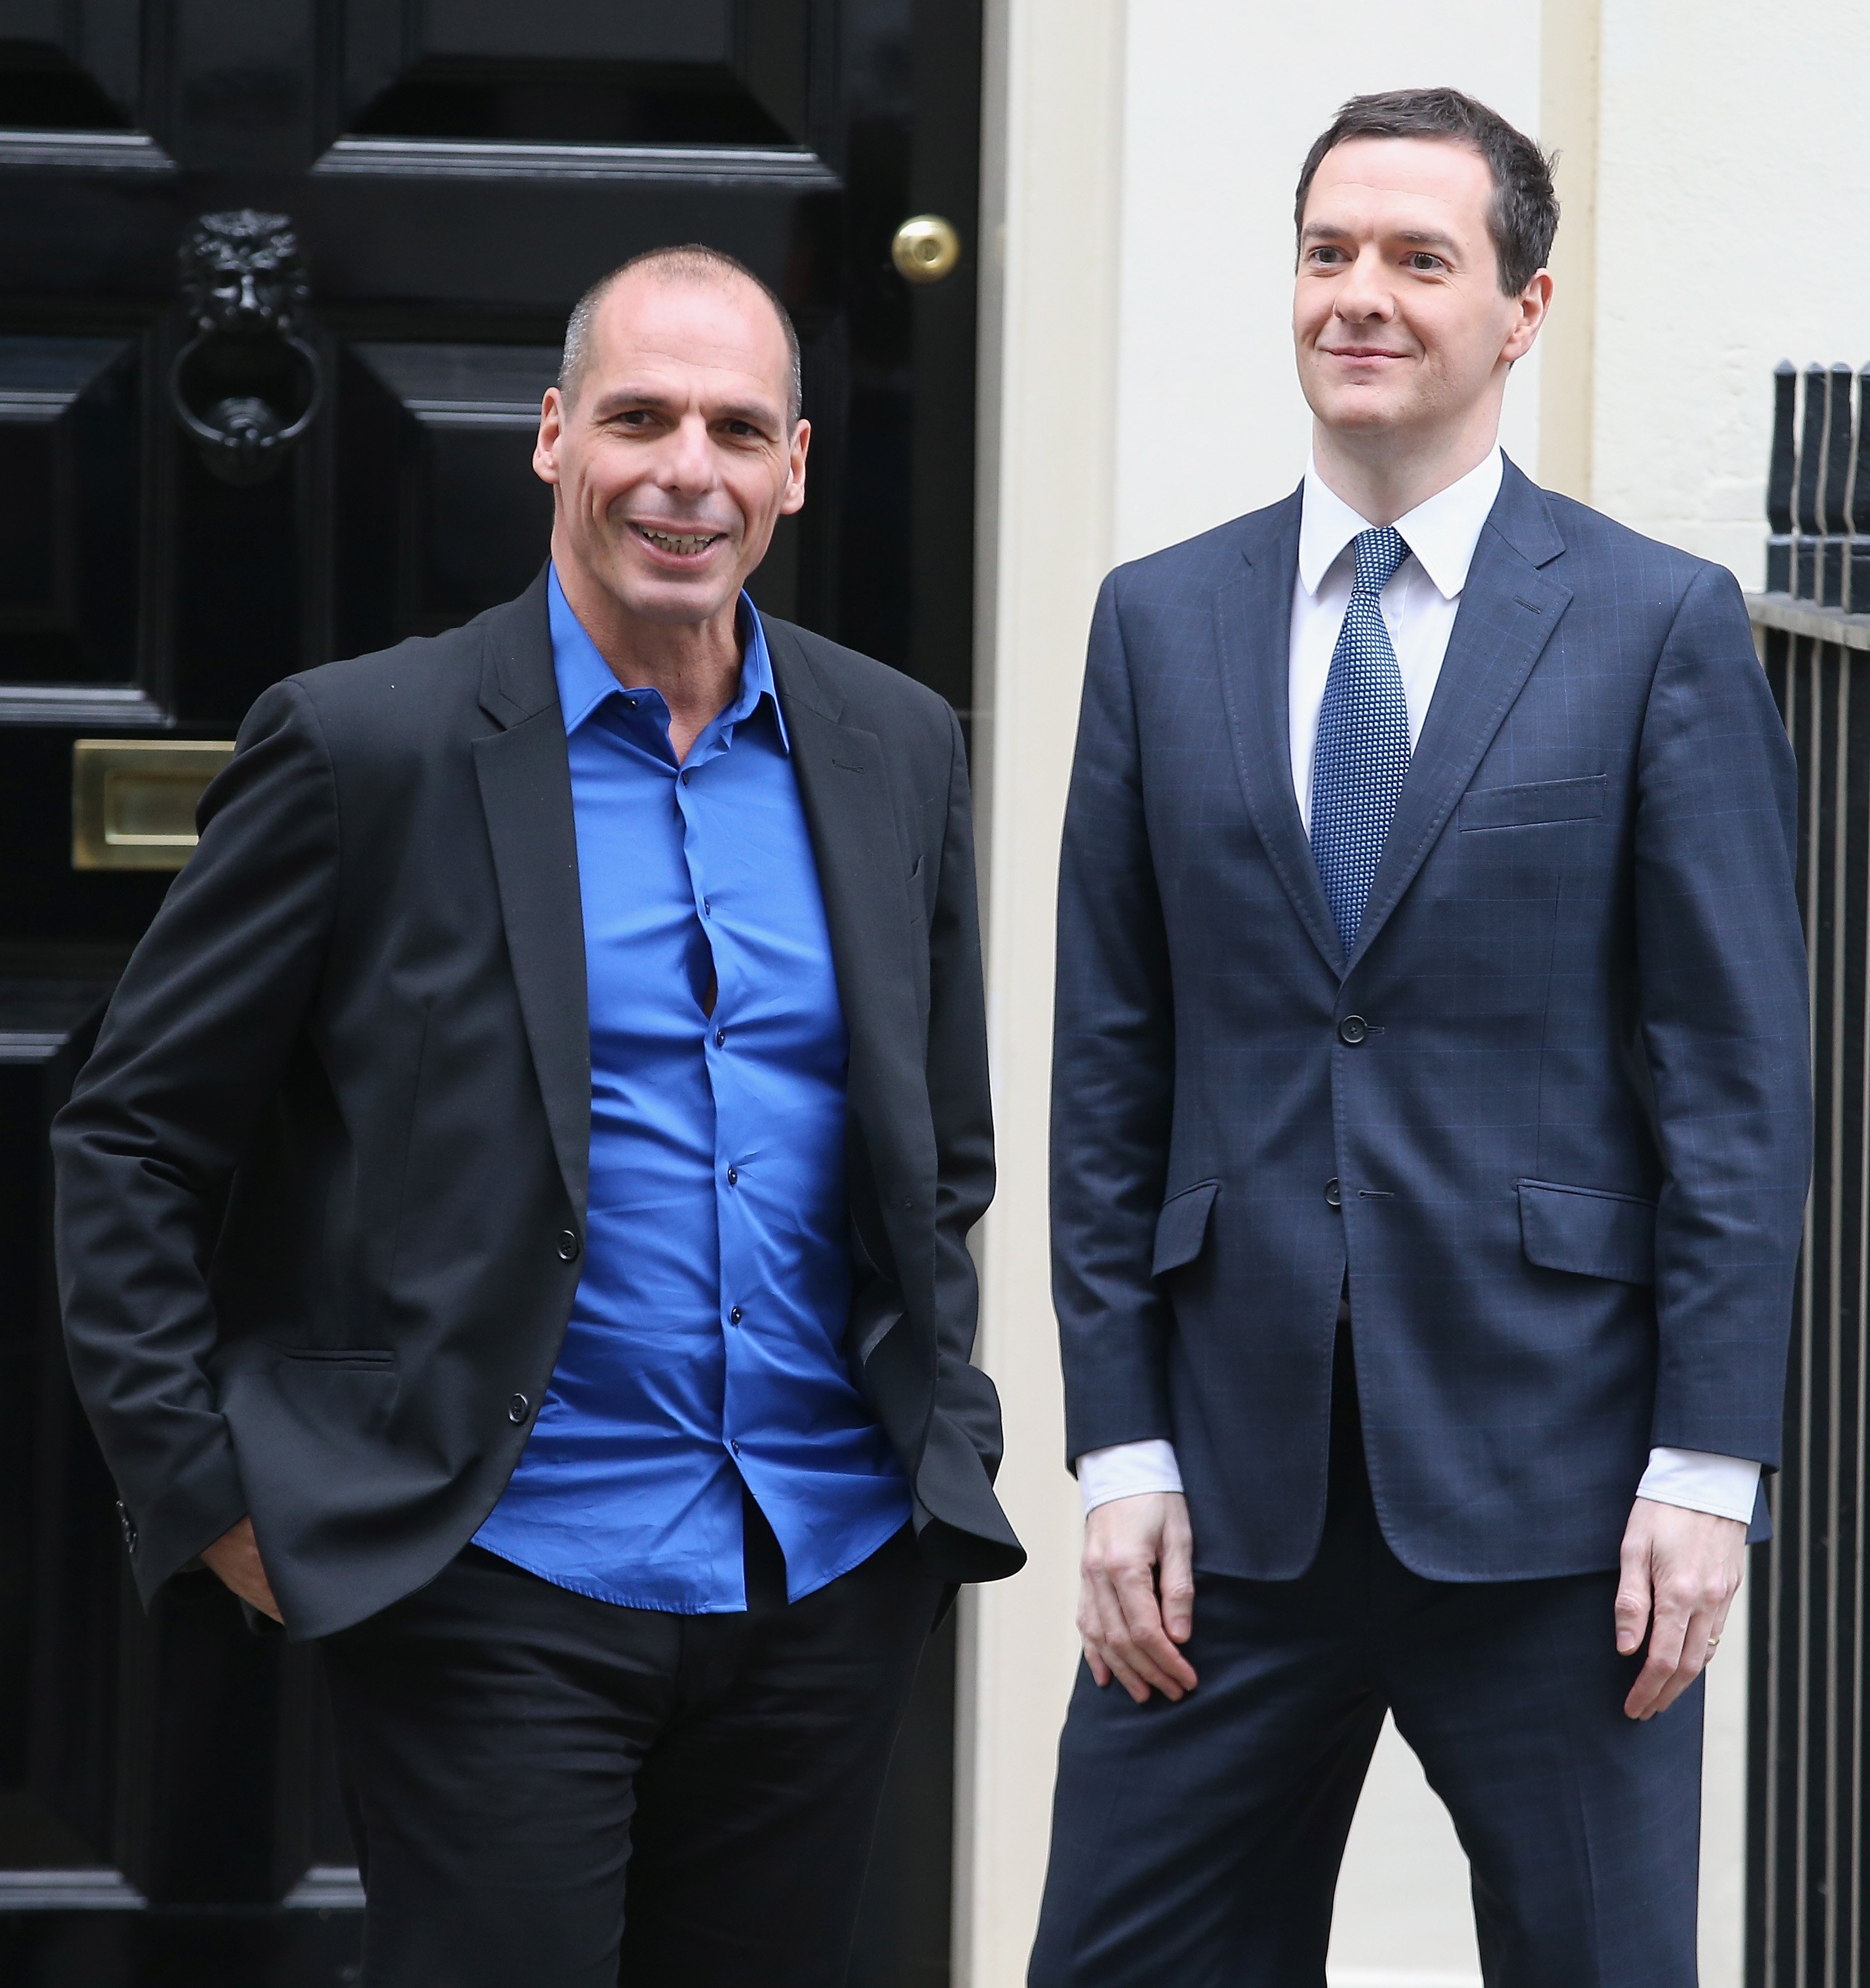 From left: Greece's finance minister Yanis Varoufakis leaves Number 11 Downing Street after meeting Chancellor of the Exchequer George Osborne on Feb. 2, 2015 in London. (Chris Jackson—Getty Images)